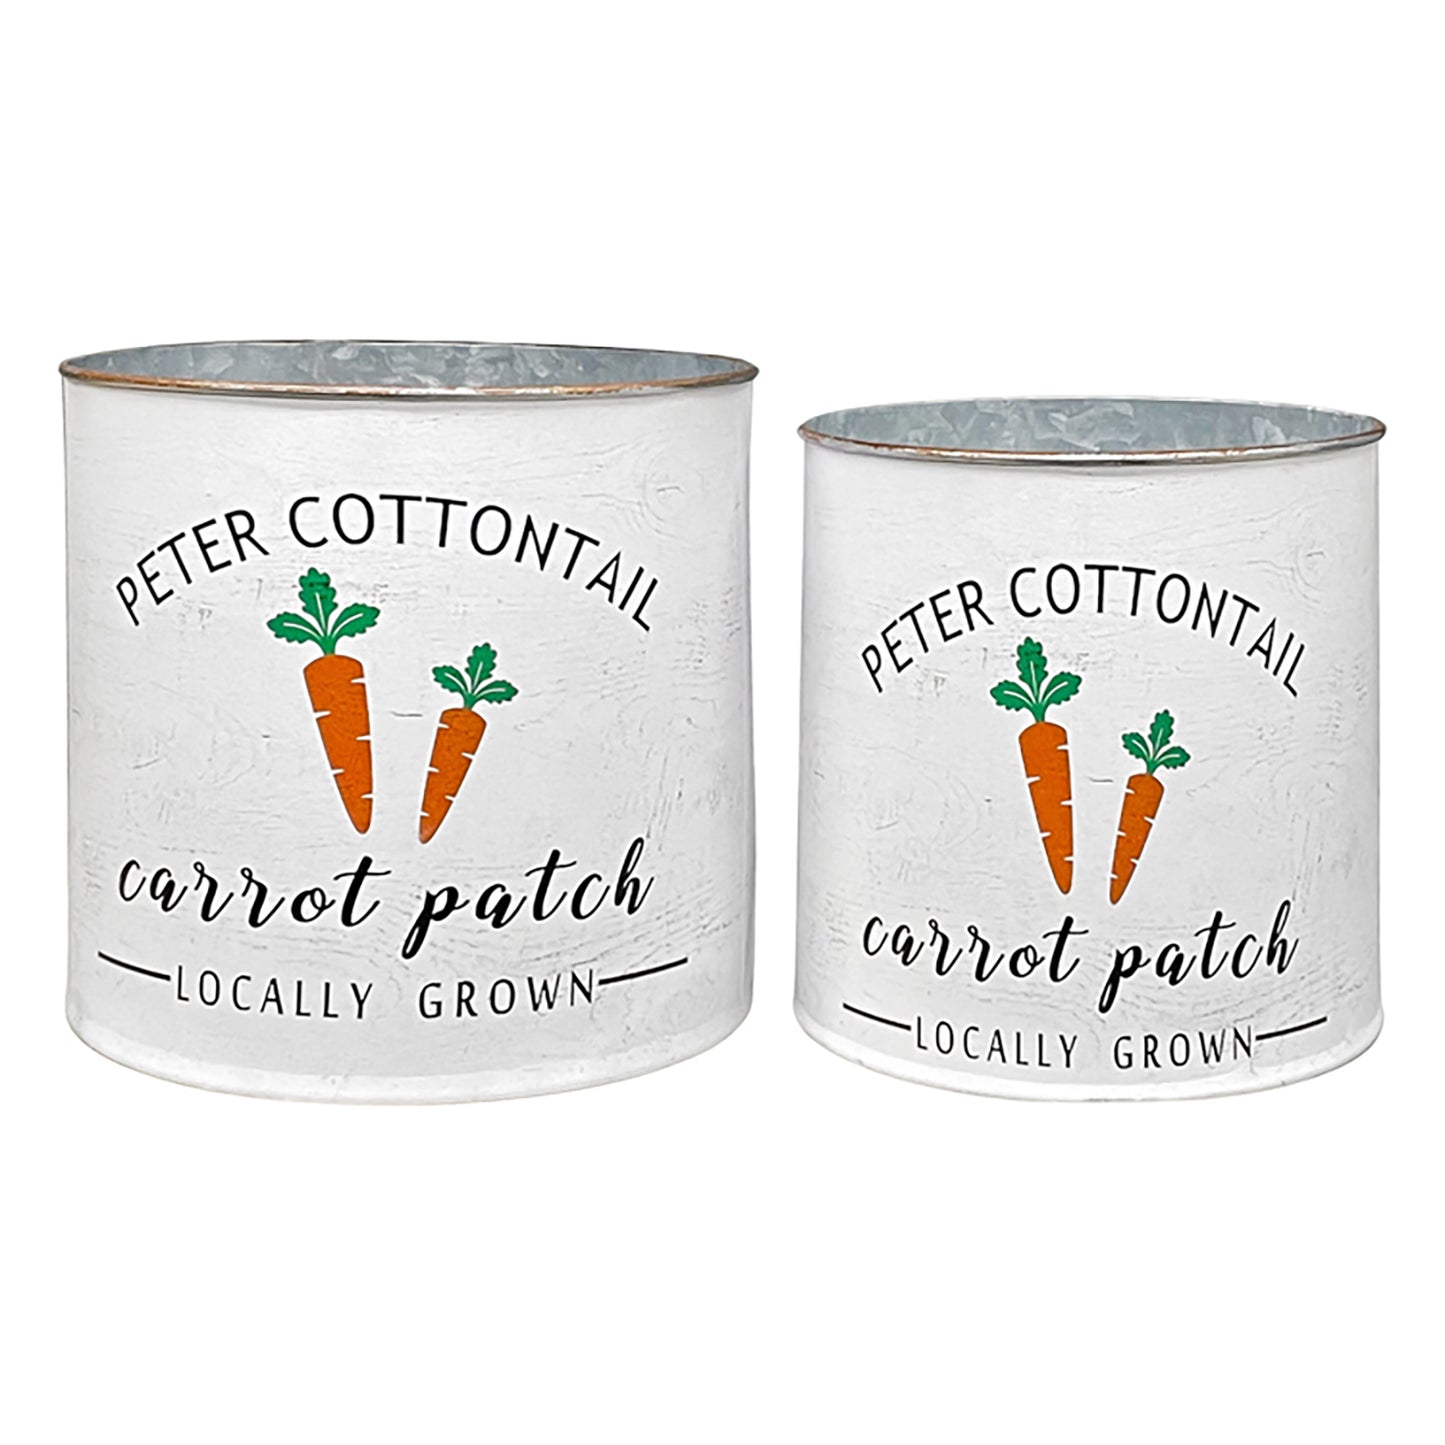 Peter cottontail bucket A/2